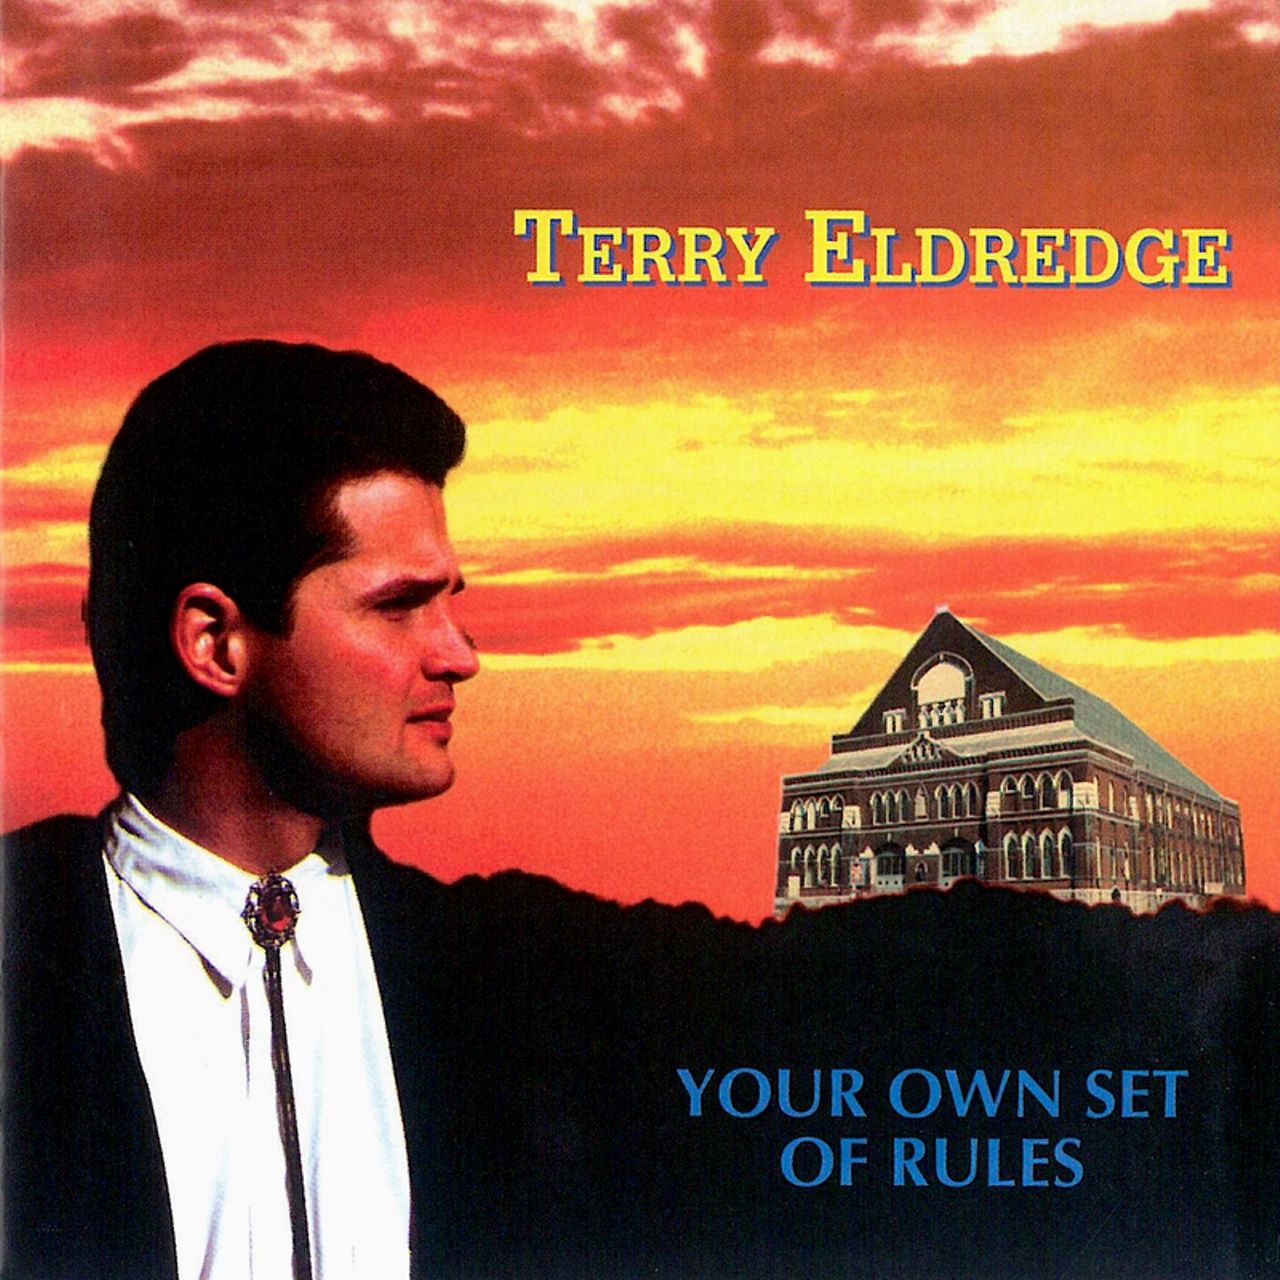 Terry Eldredge - Your Own Set Of Rules cover album